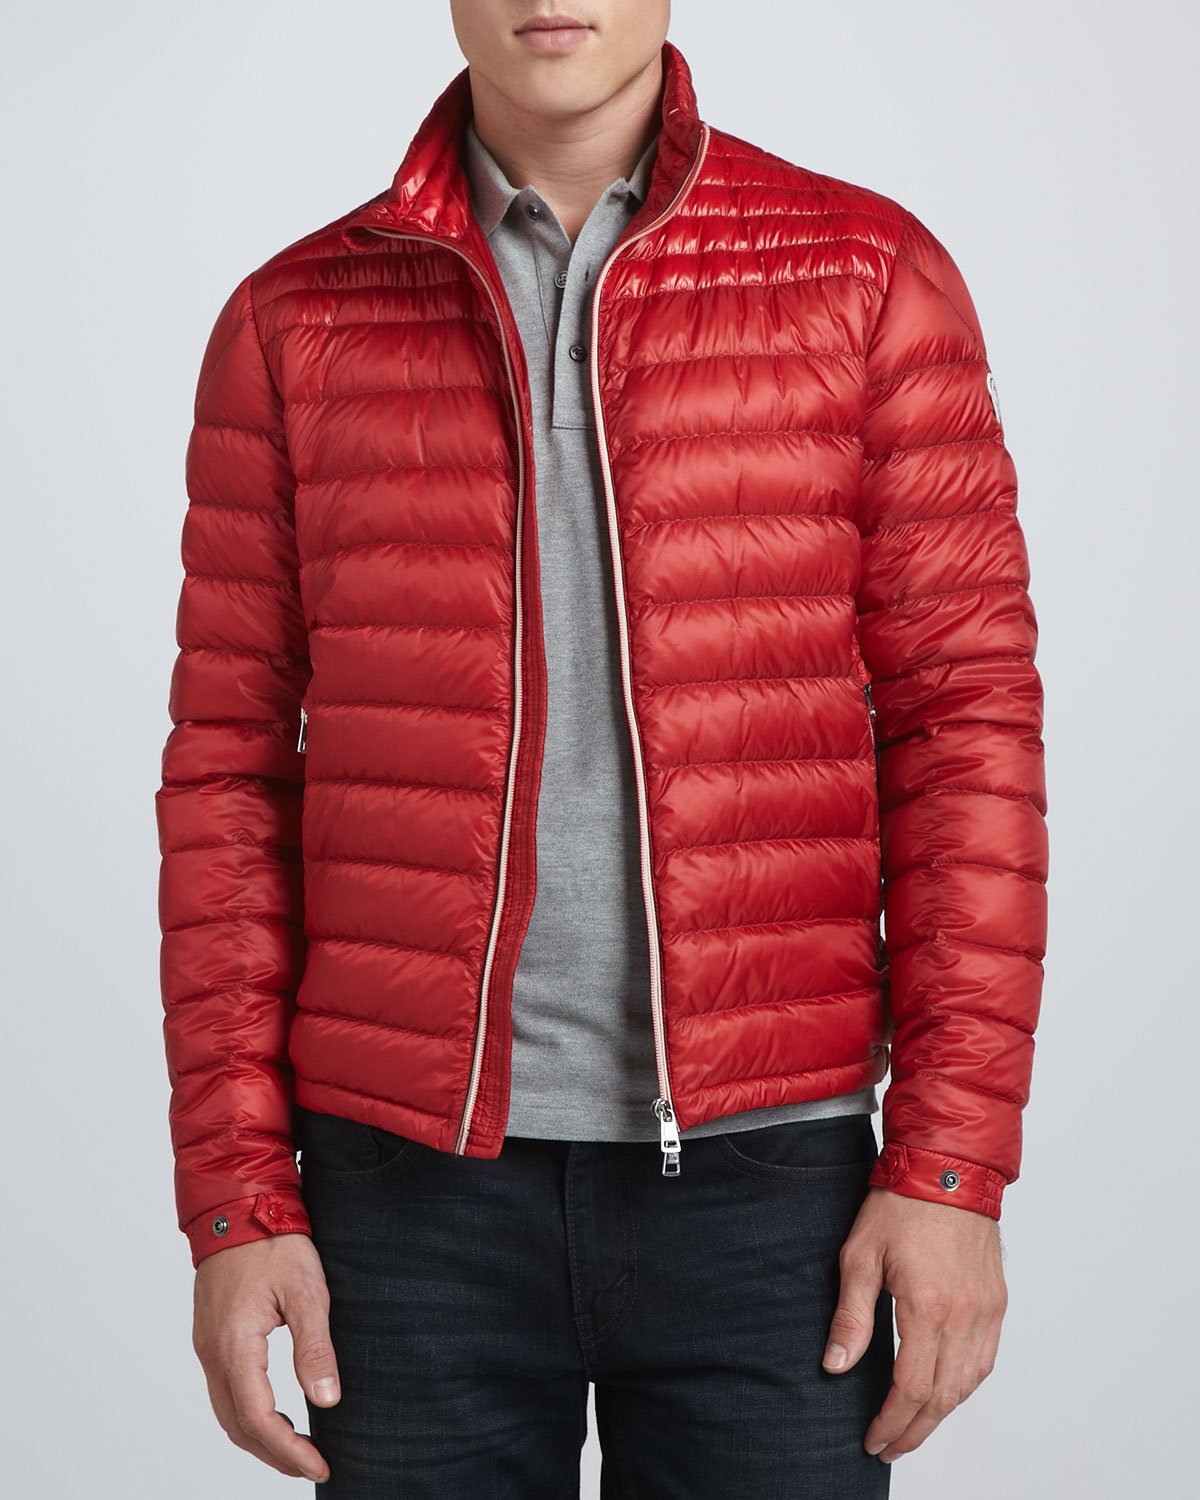 moncler red puffer jacket mens